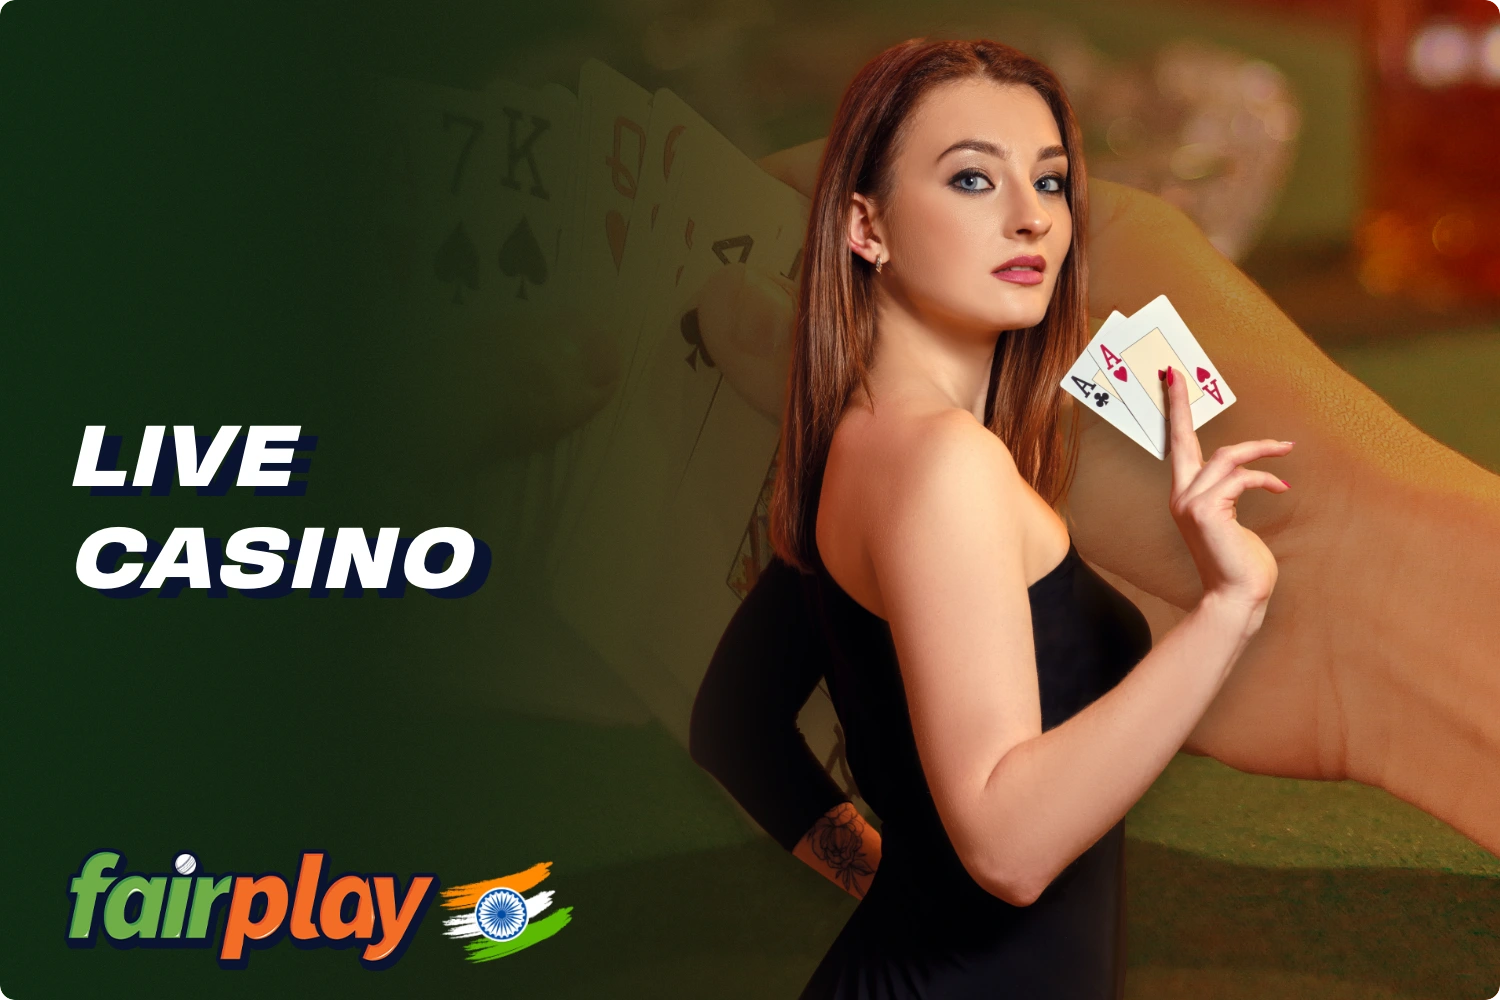 Fairplay live casino is great for those who want to experience a real casino atmosphere